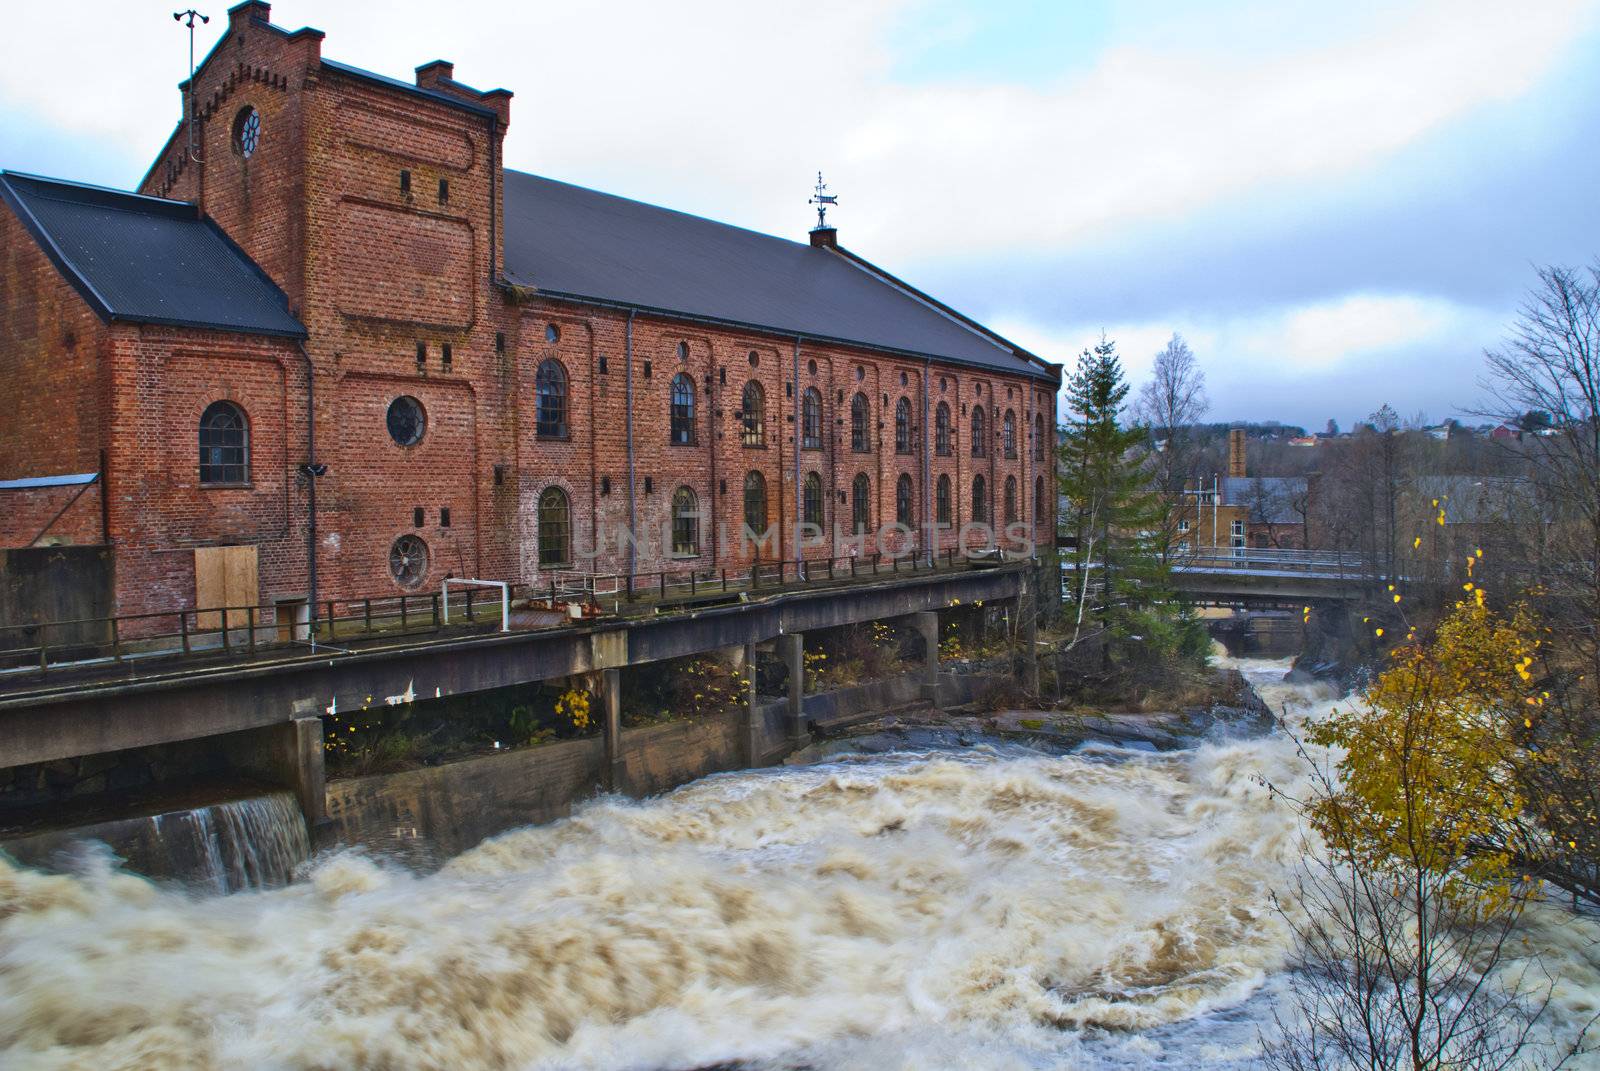 The filter station is northern rurope's larges of its kind and is based on automatic self flushing rotary drum, the filter is built into existing pools in the basement of a pulp mill factory originally from 1885, the filter station is located at tistedal in halden, image is shot in november 2012